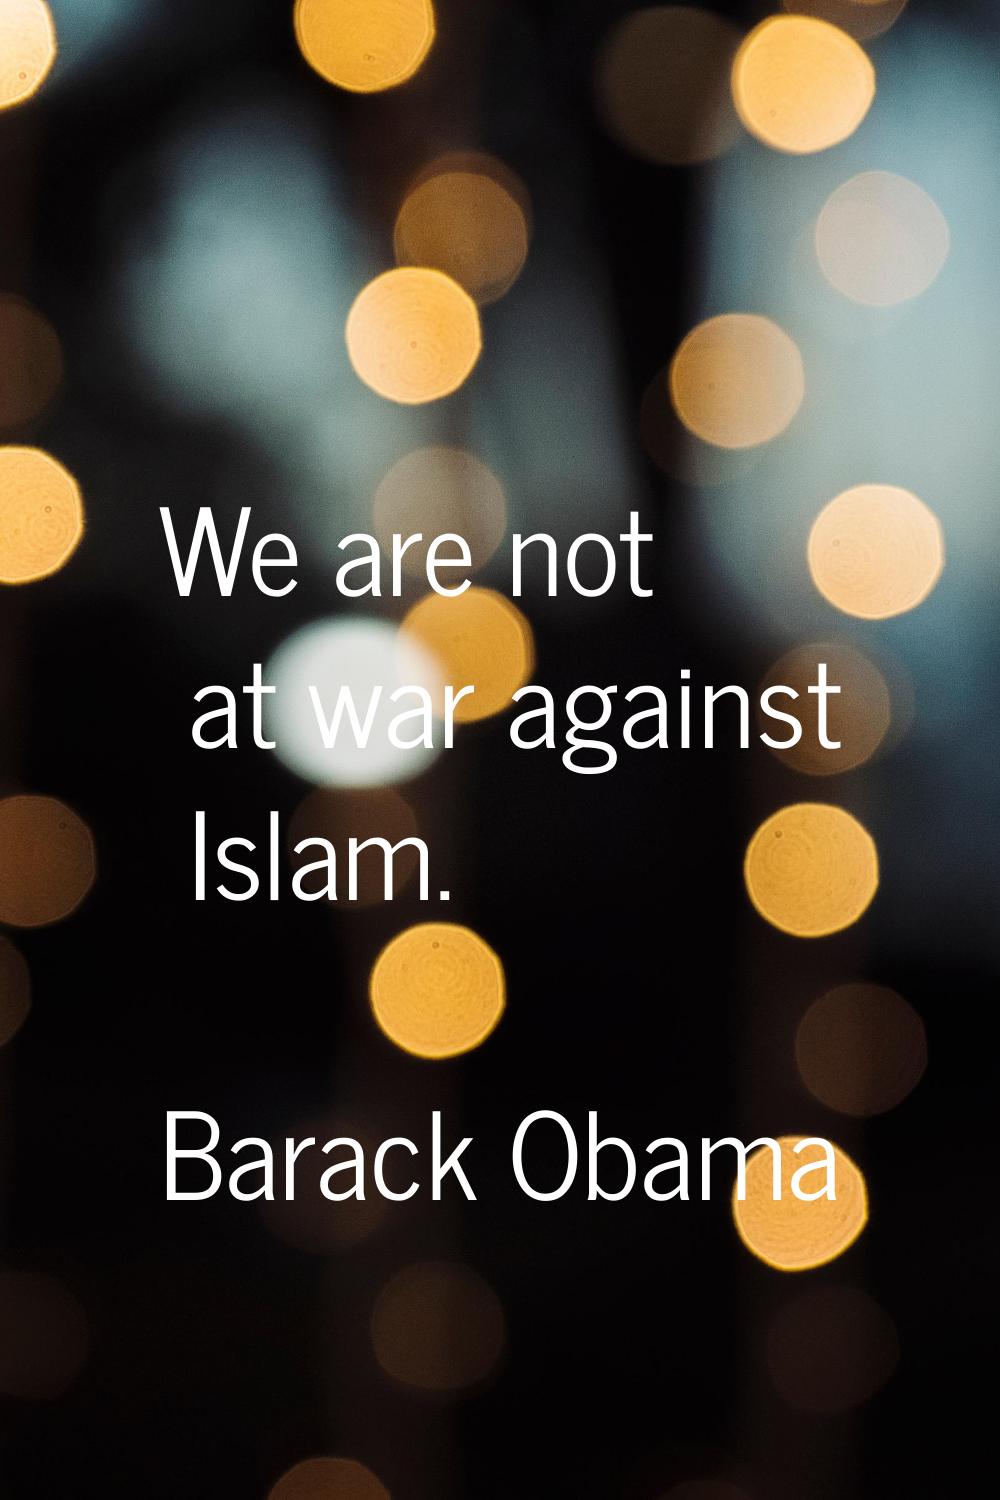 We are not at war against Islam.